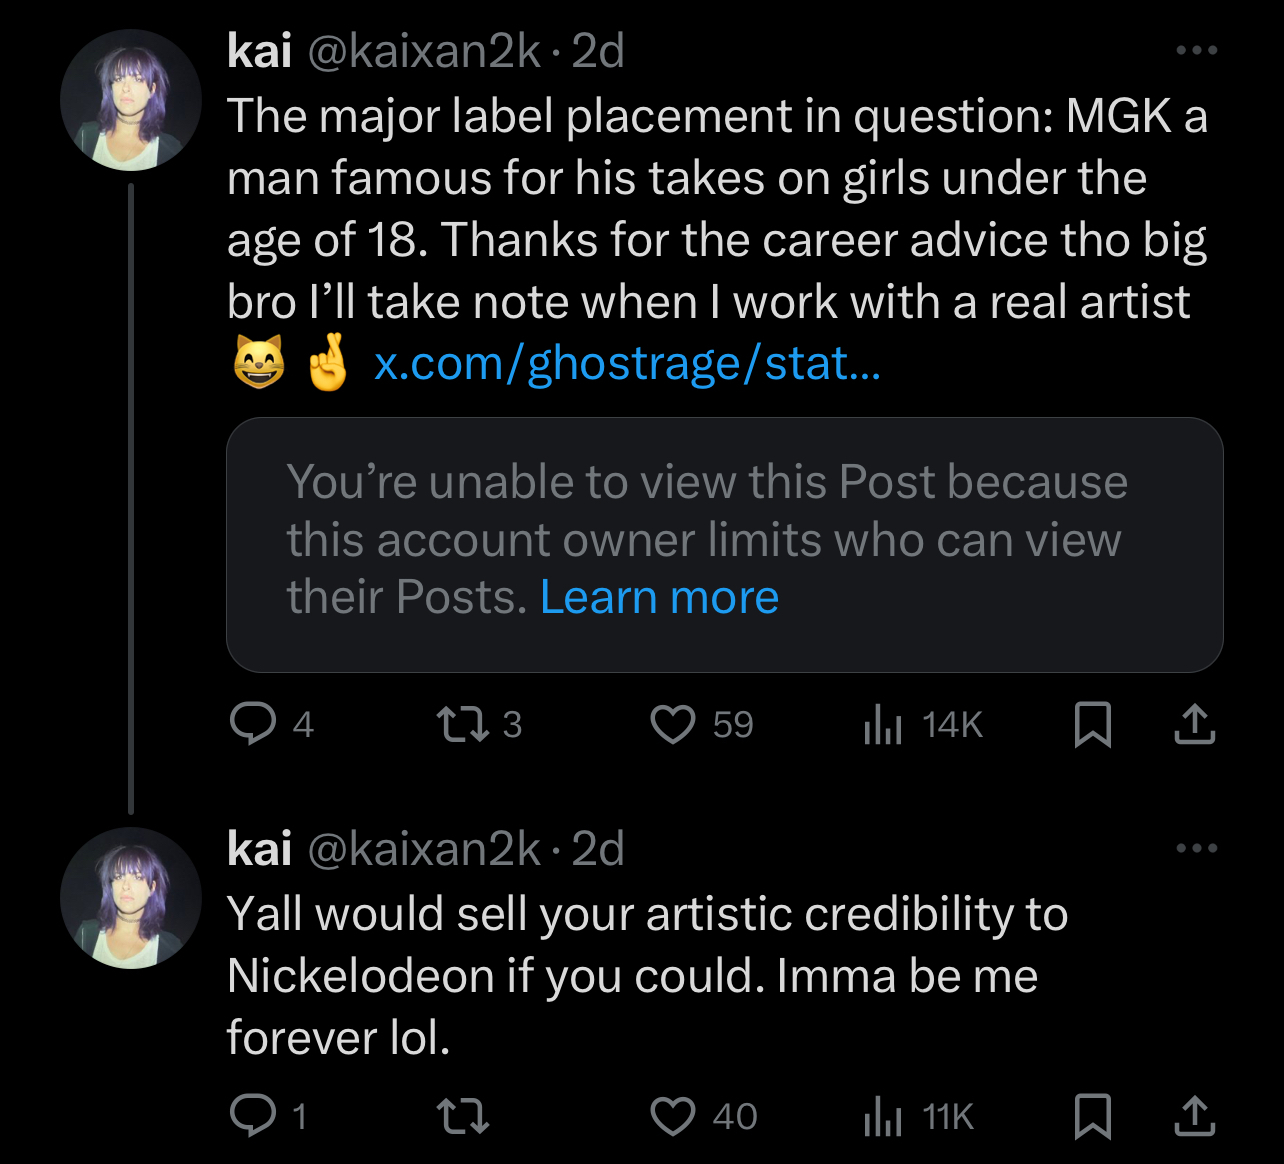 Screenshots of tweets discussing the influence of major label placements in the music industry